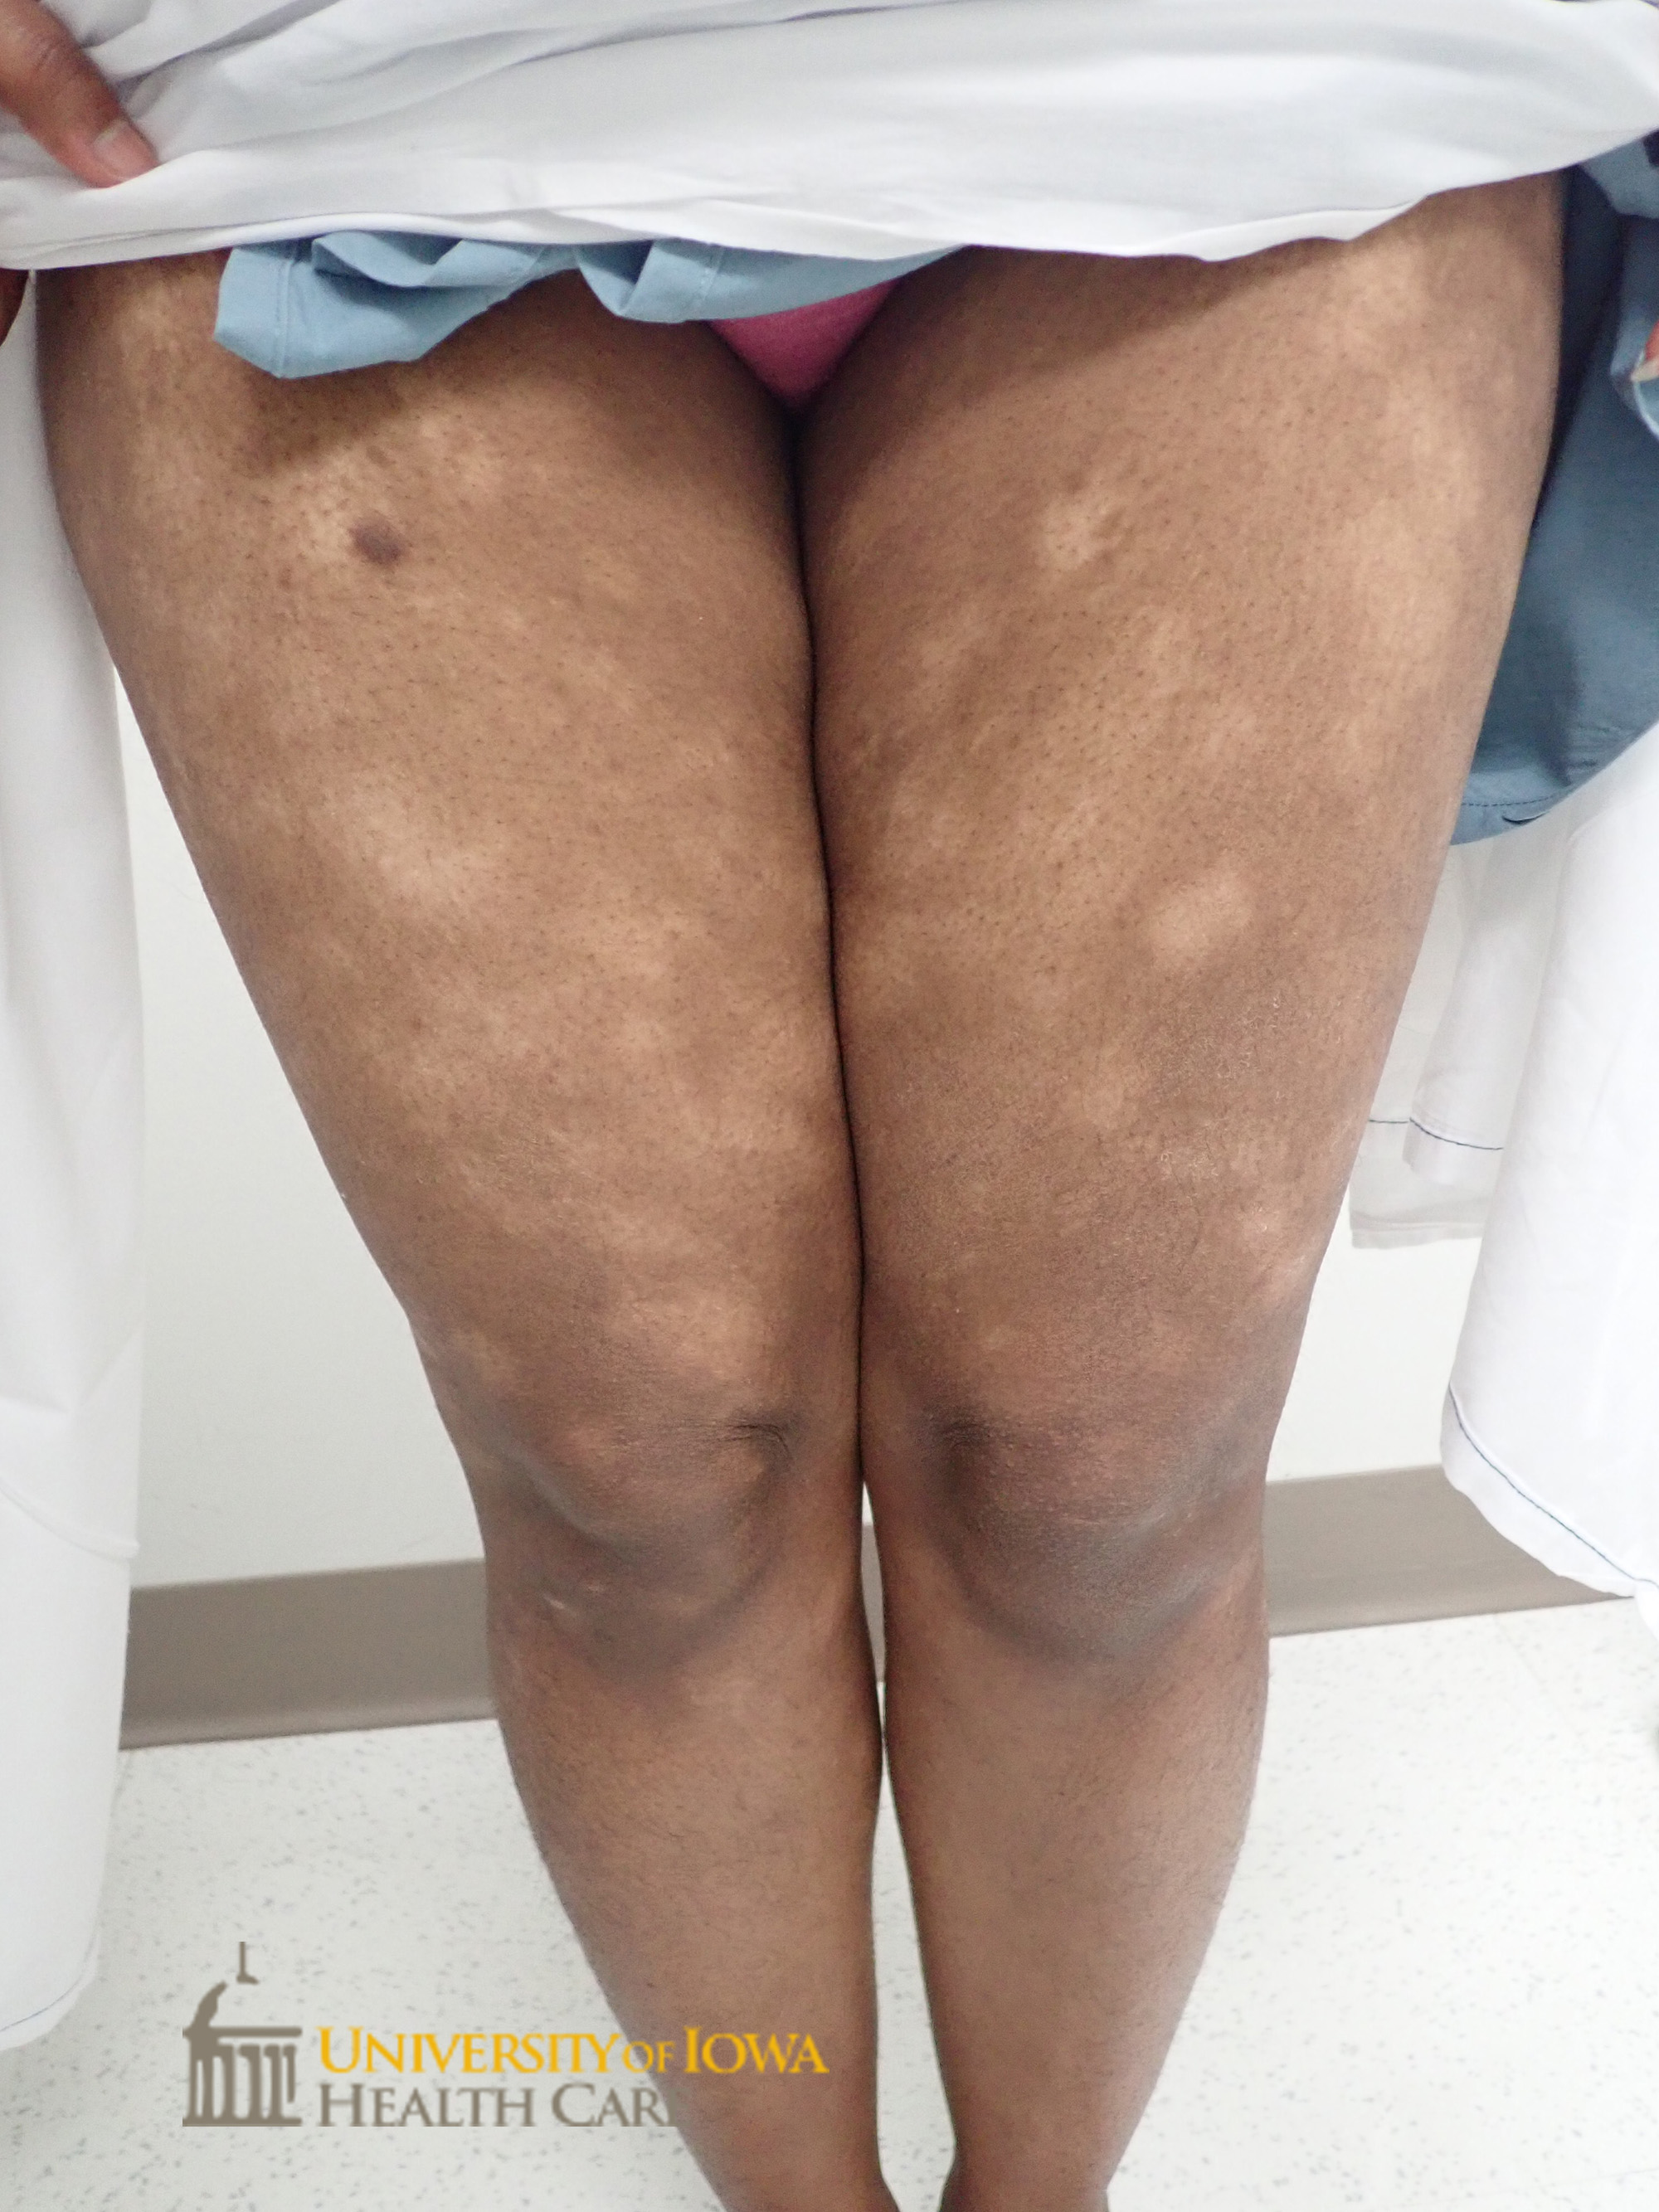 Annular hypopigmented patches on the thighs. (click images for higher resolution).